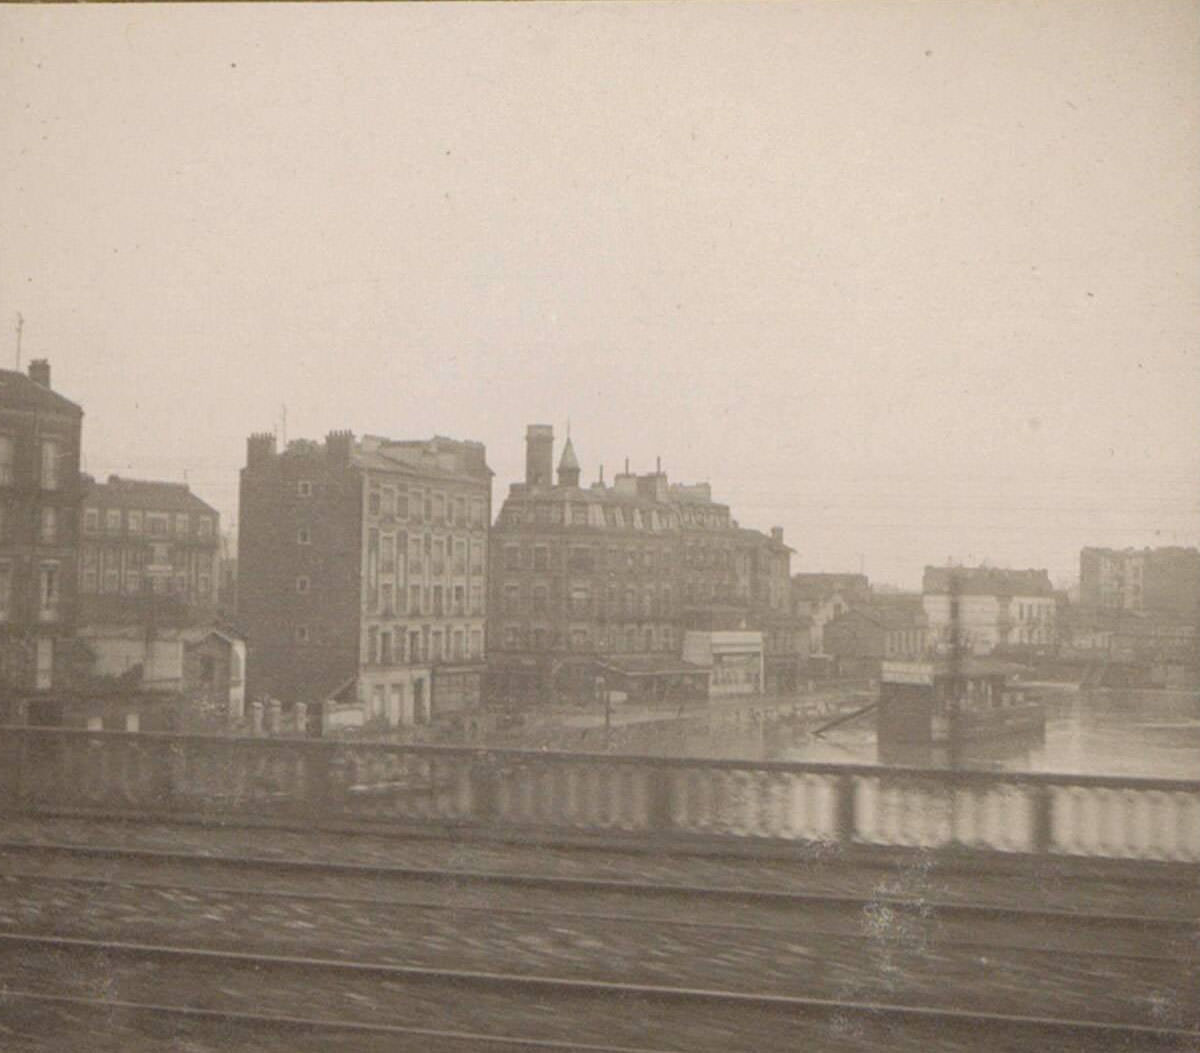 Flooded street and buildings during Paris flood, seen from the train. Part of the photo album flooding Paris and suburbs 1910.